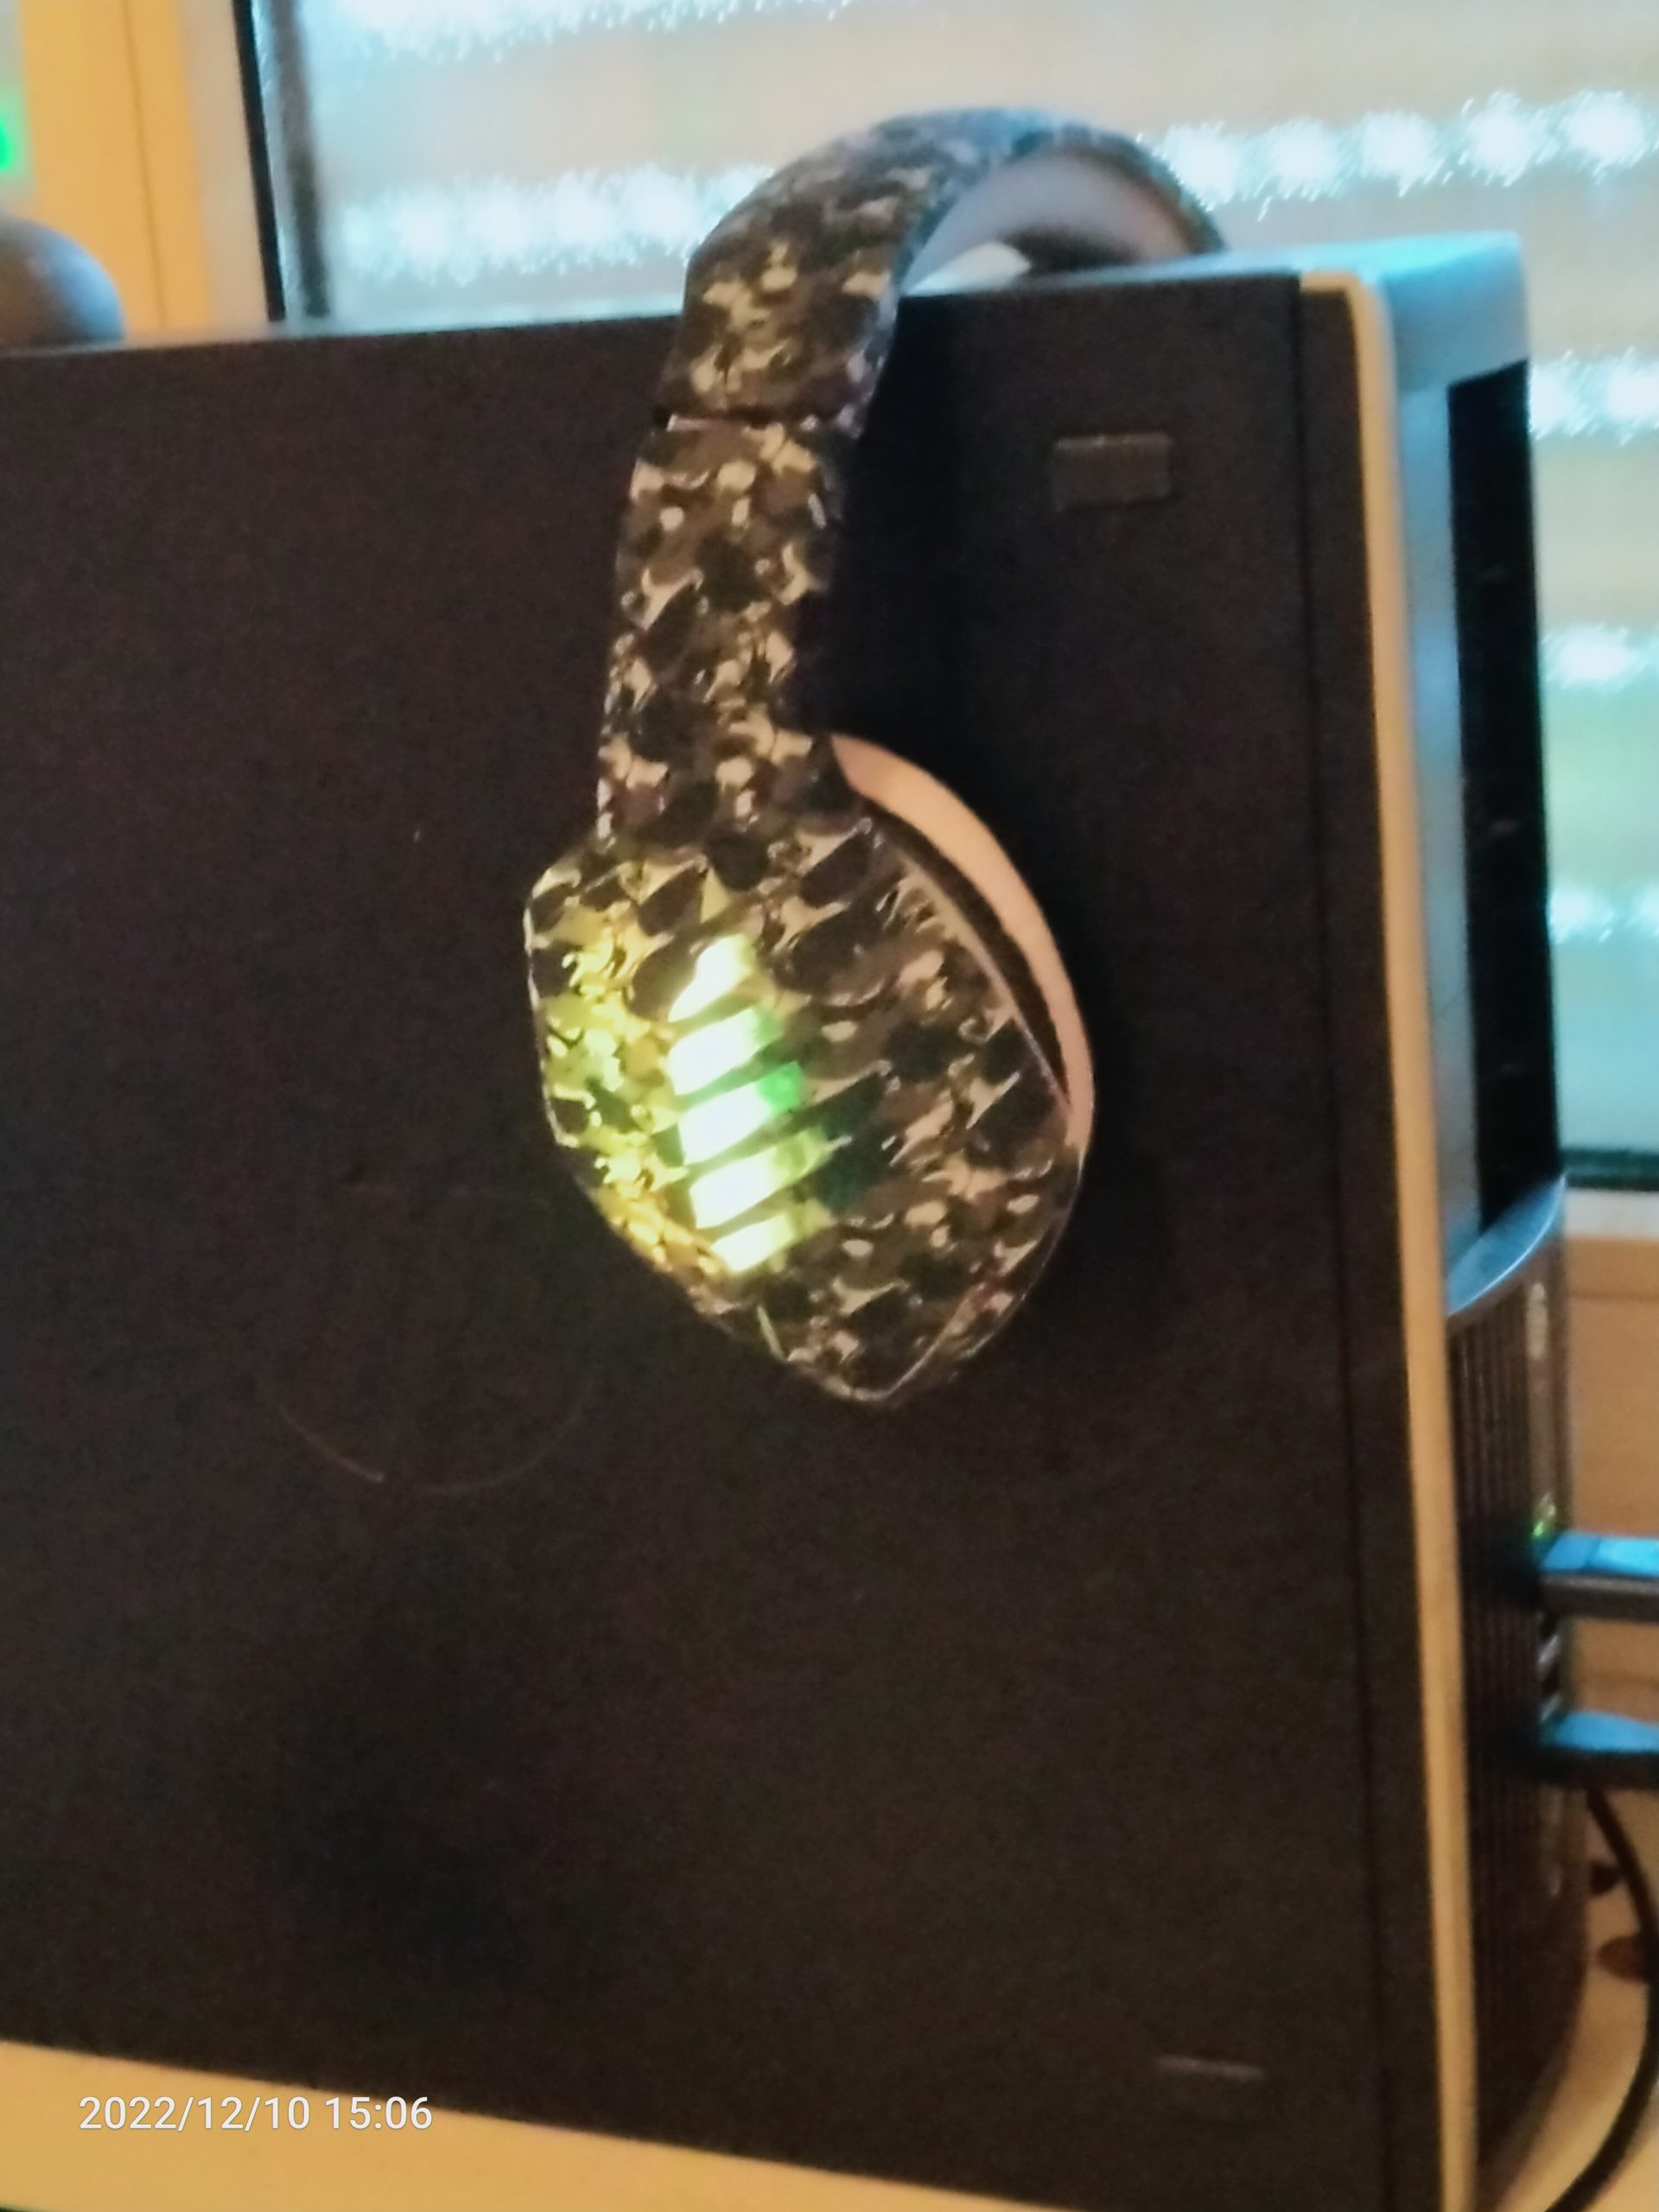 Auriculares gaming con leds